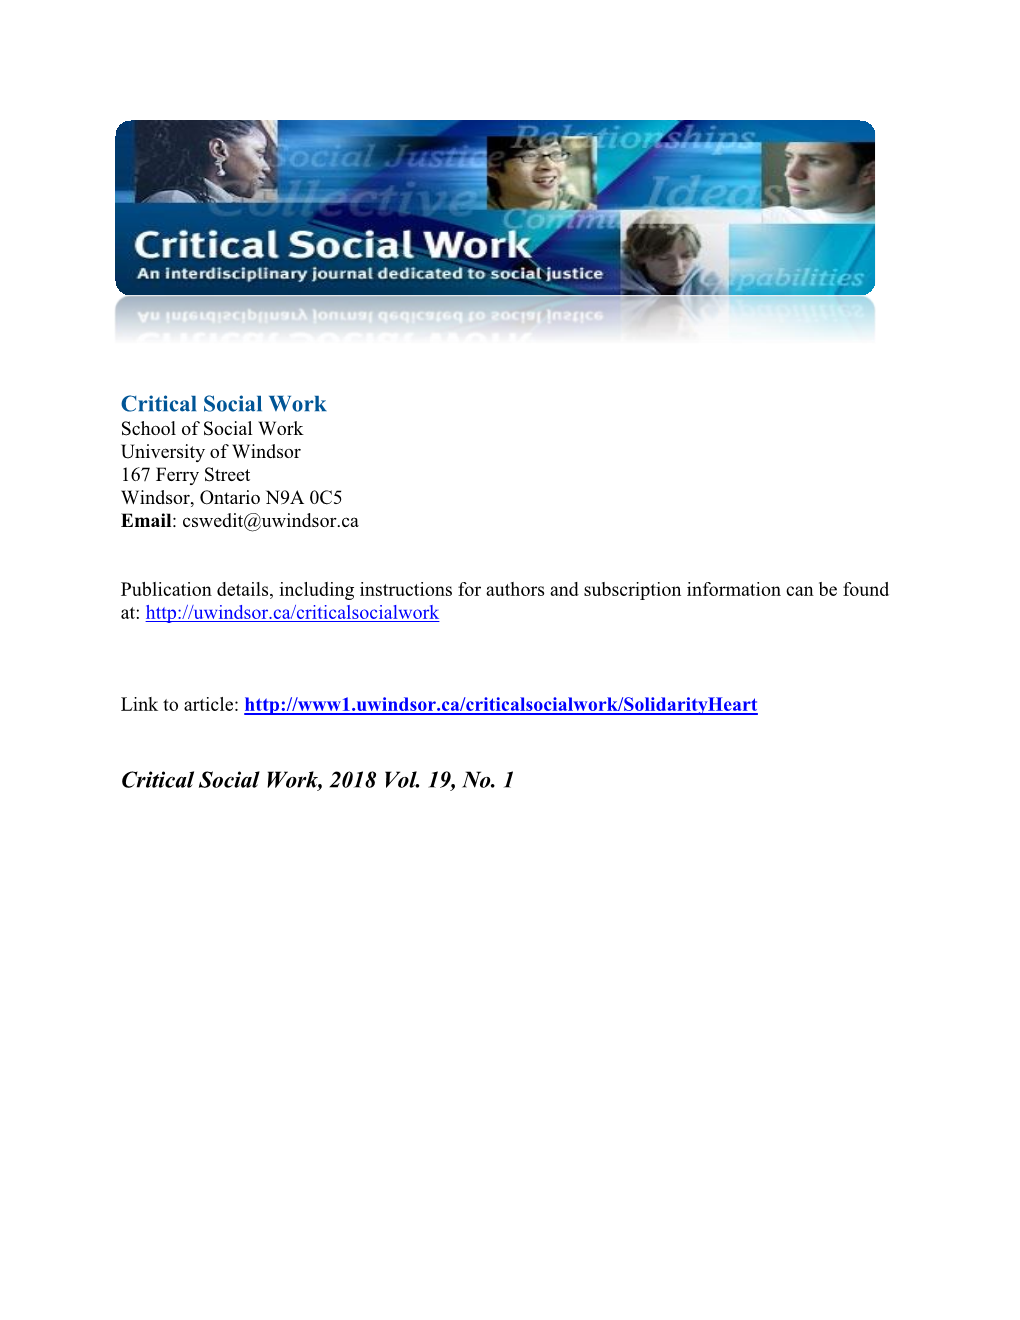 Solidarity and Heart - the Development of Structural Social Work: a Critical Analysis Critical Social Work 19(1) Walter WAI TAK Chan